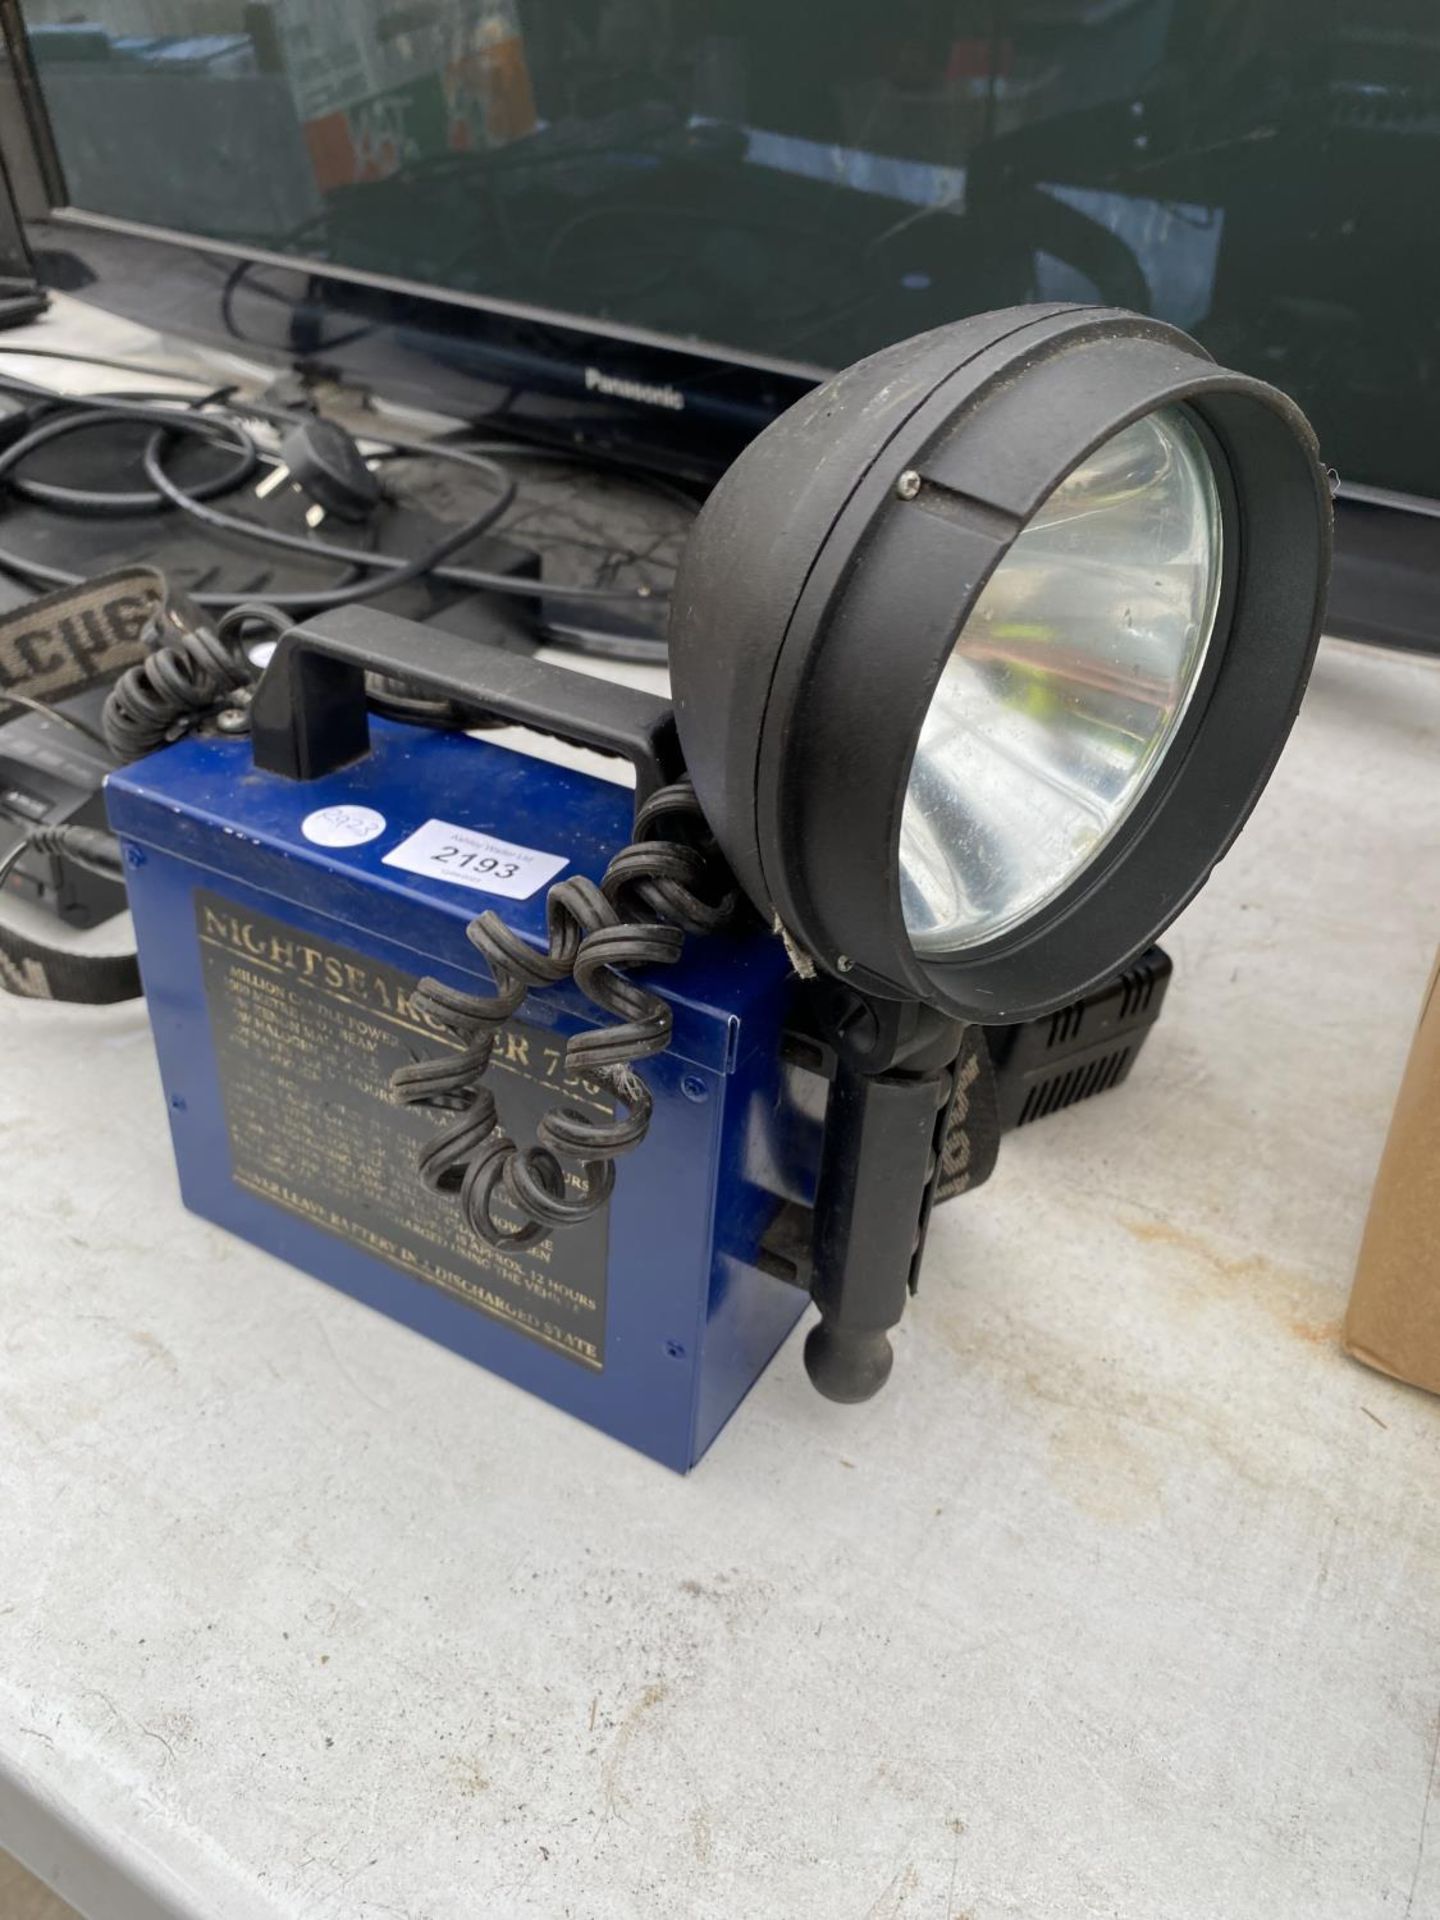 A NIGHTSEARCHER 750 LAMP